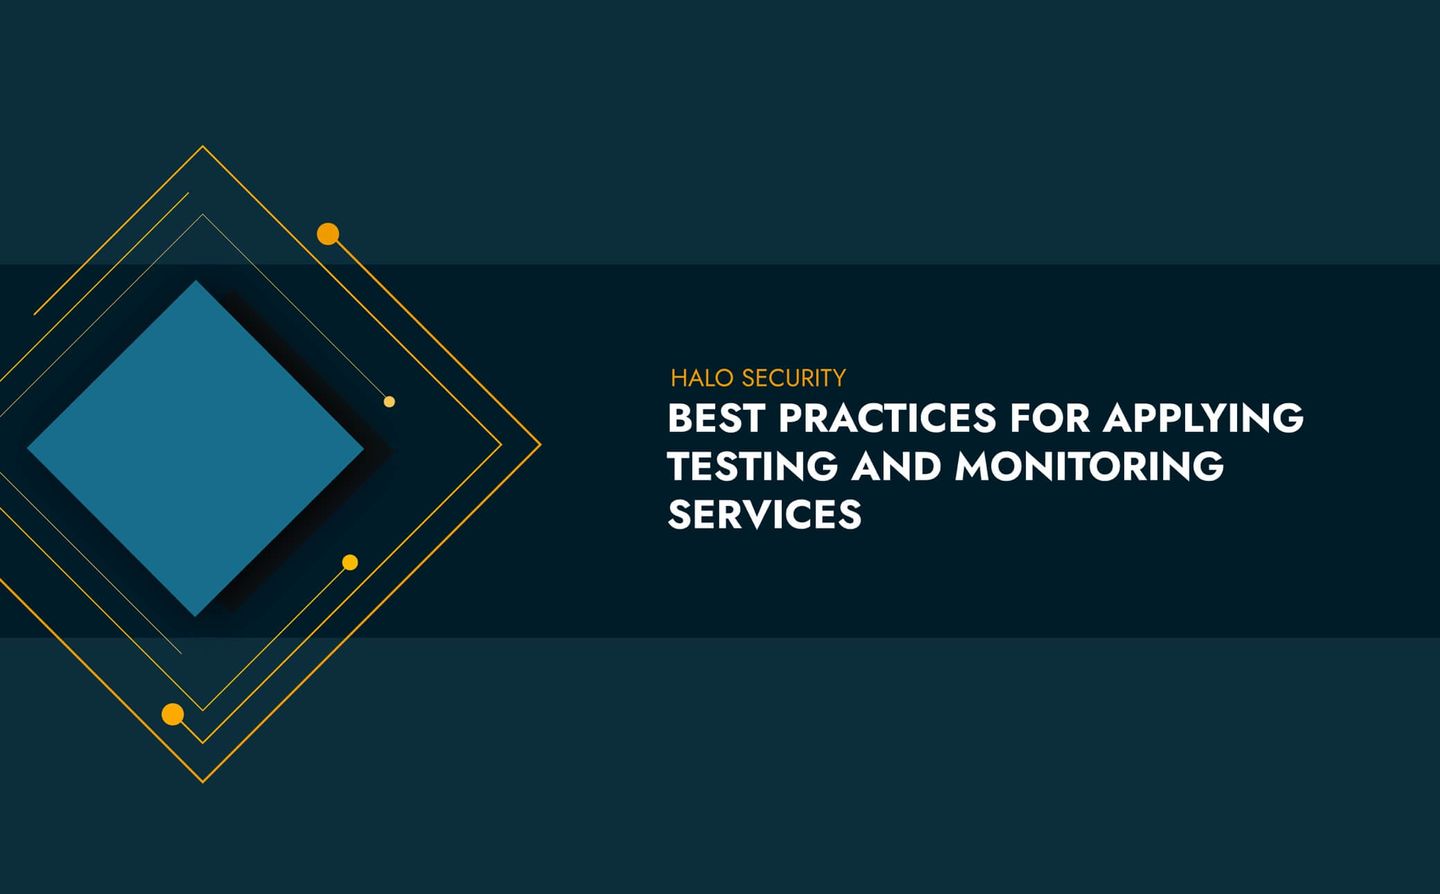 Best practices for applying Halo Security's security testing and monitoring services to your assets